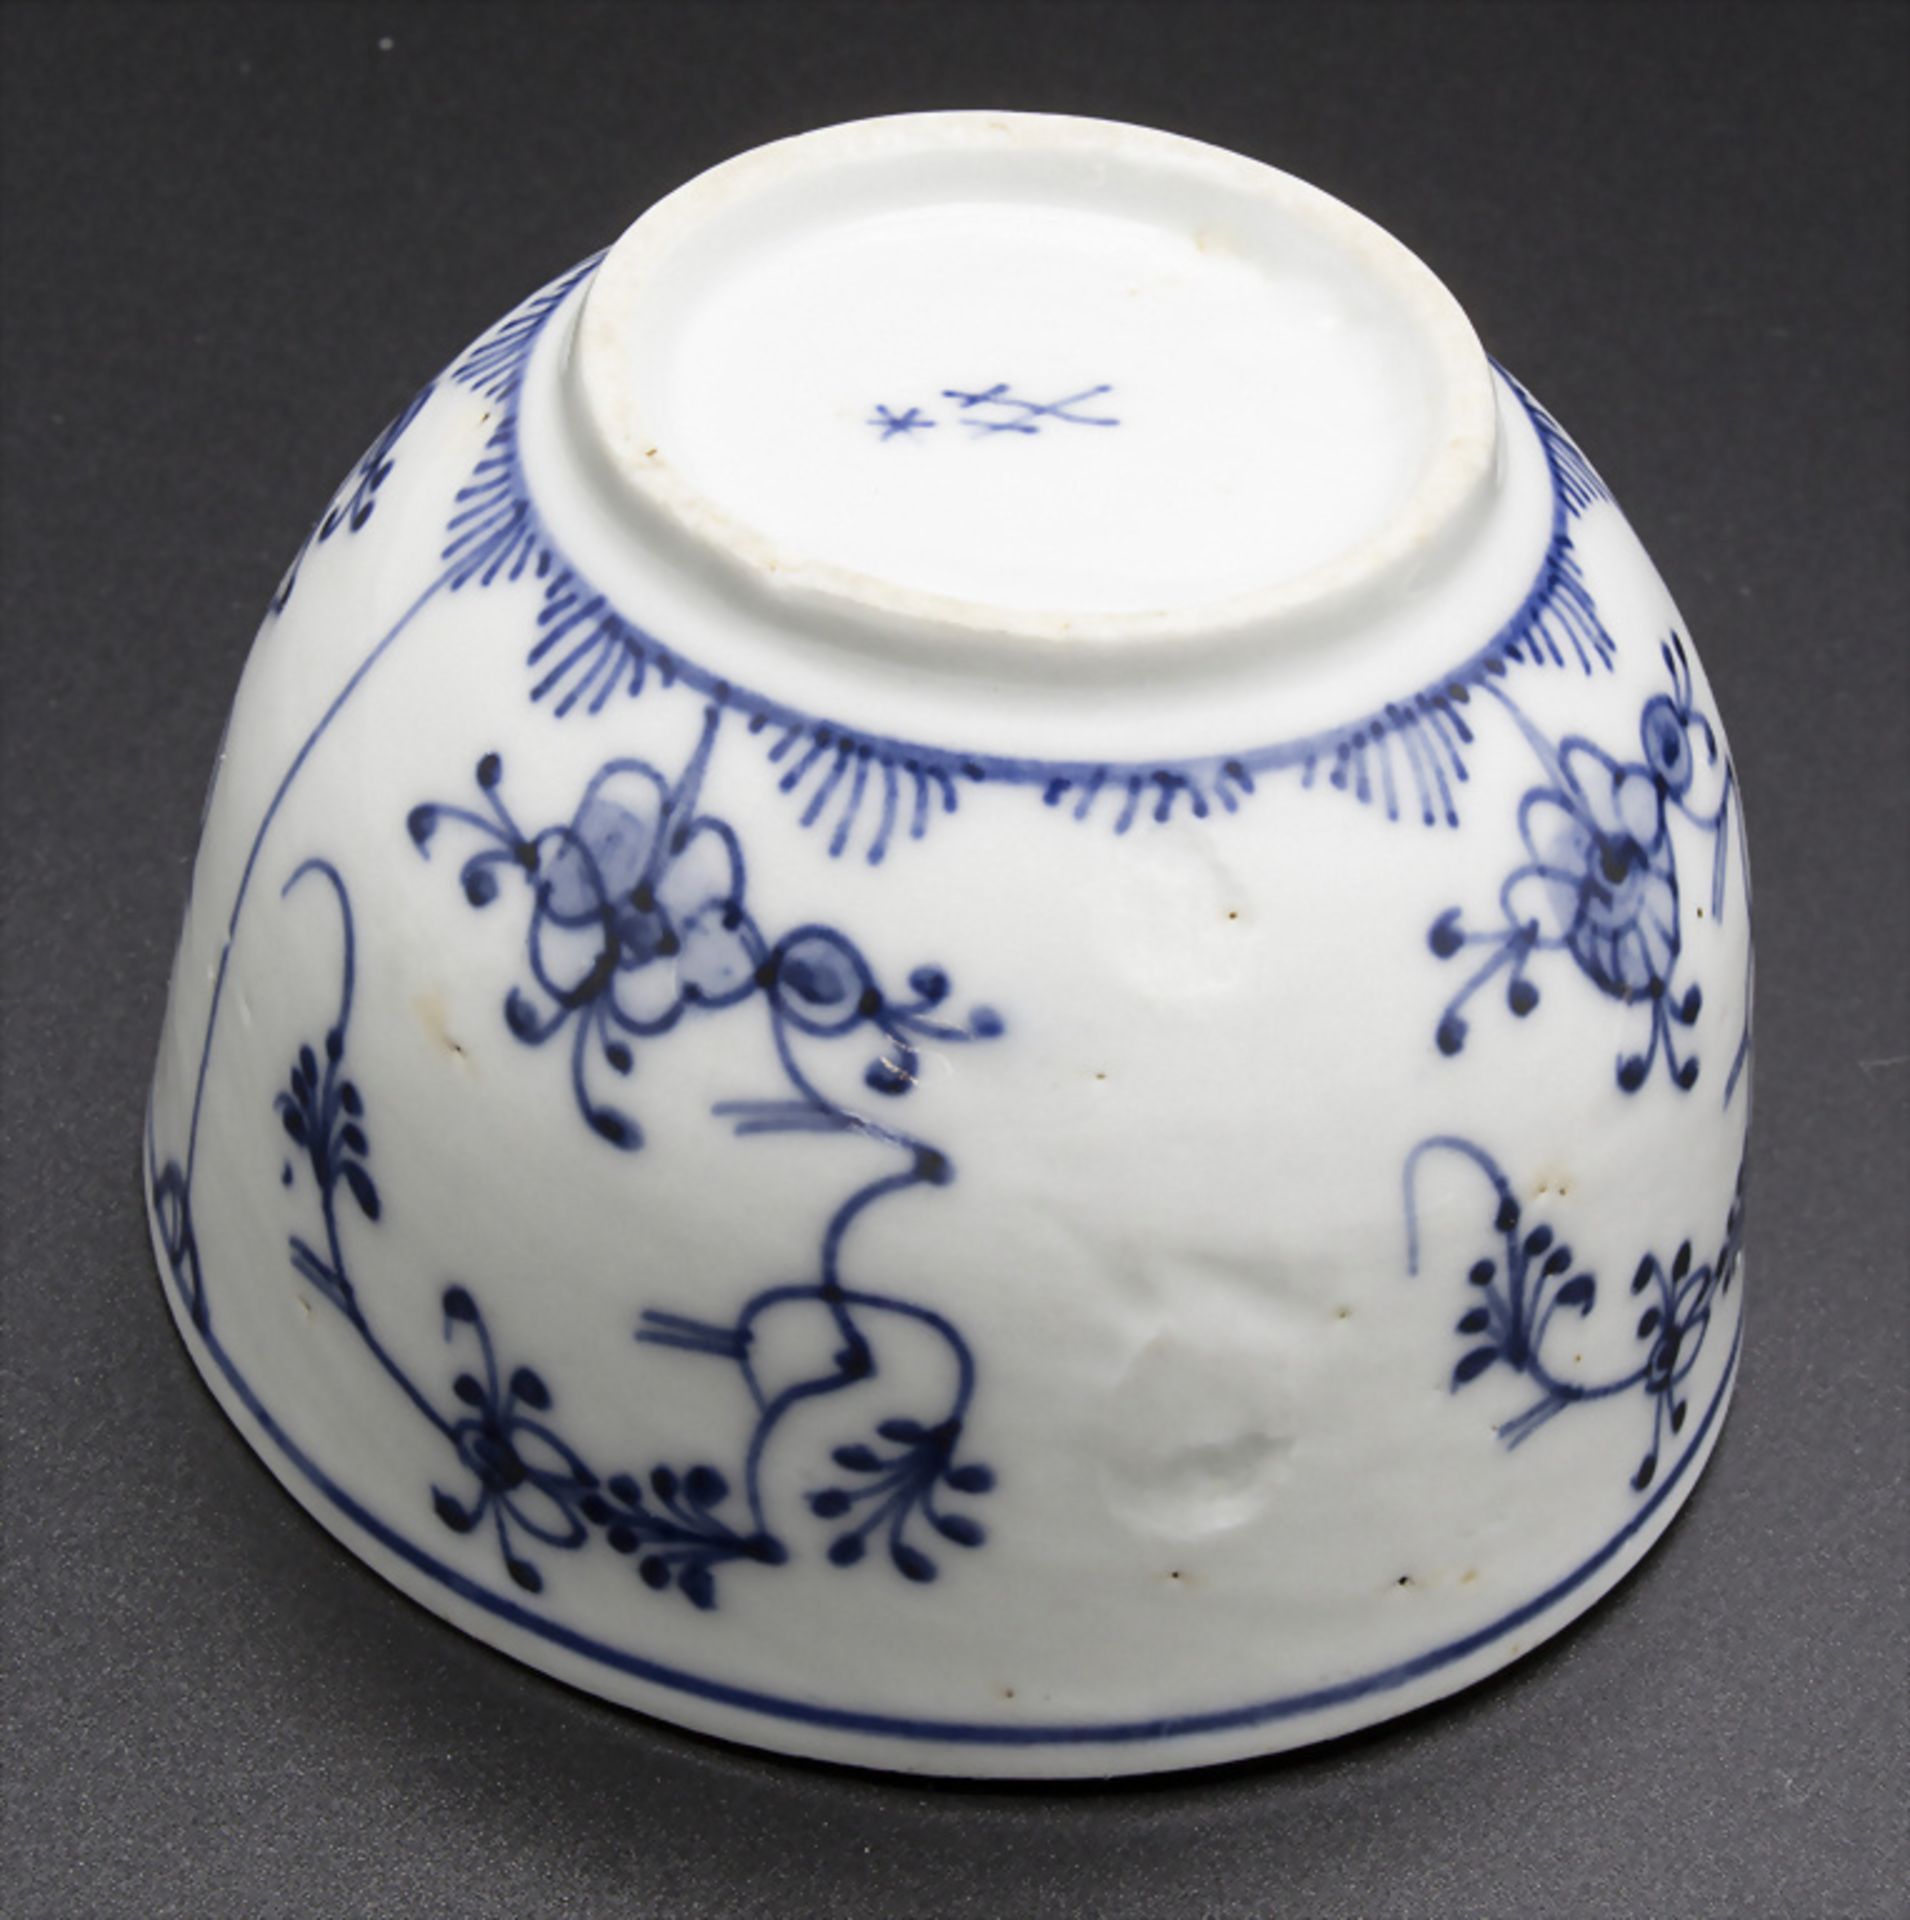 Koppchen mit Blaumalerei / A coupling with blue Indian pattern, Meissen, Marcolini-Periode, um 1780 - Image 4 of 5